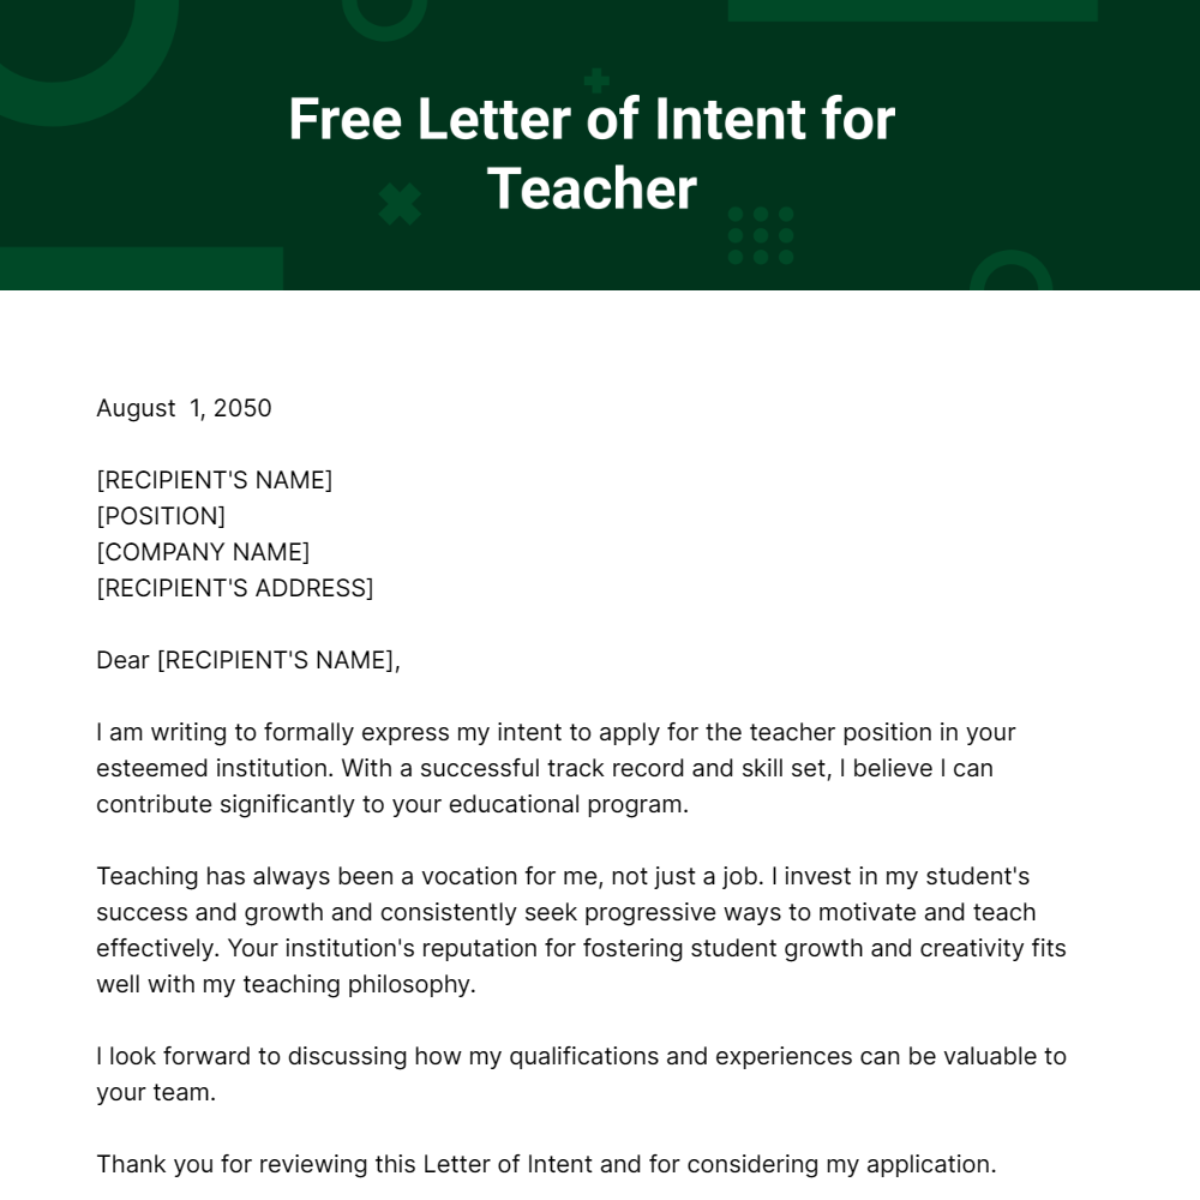 Free Letter of Intent for Teacher Template